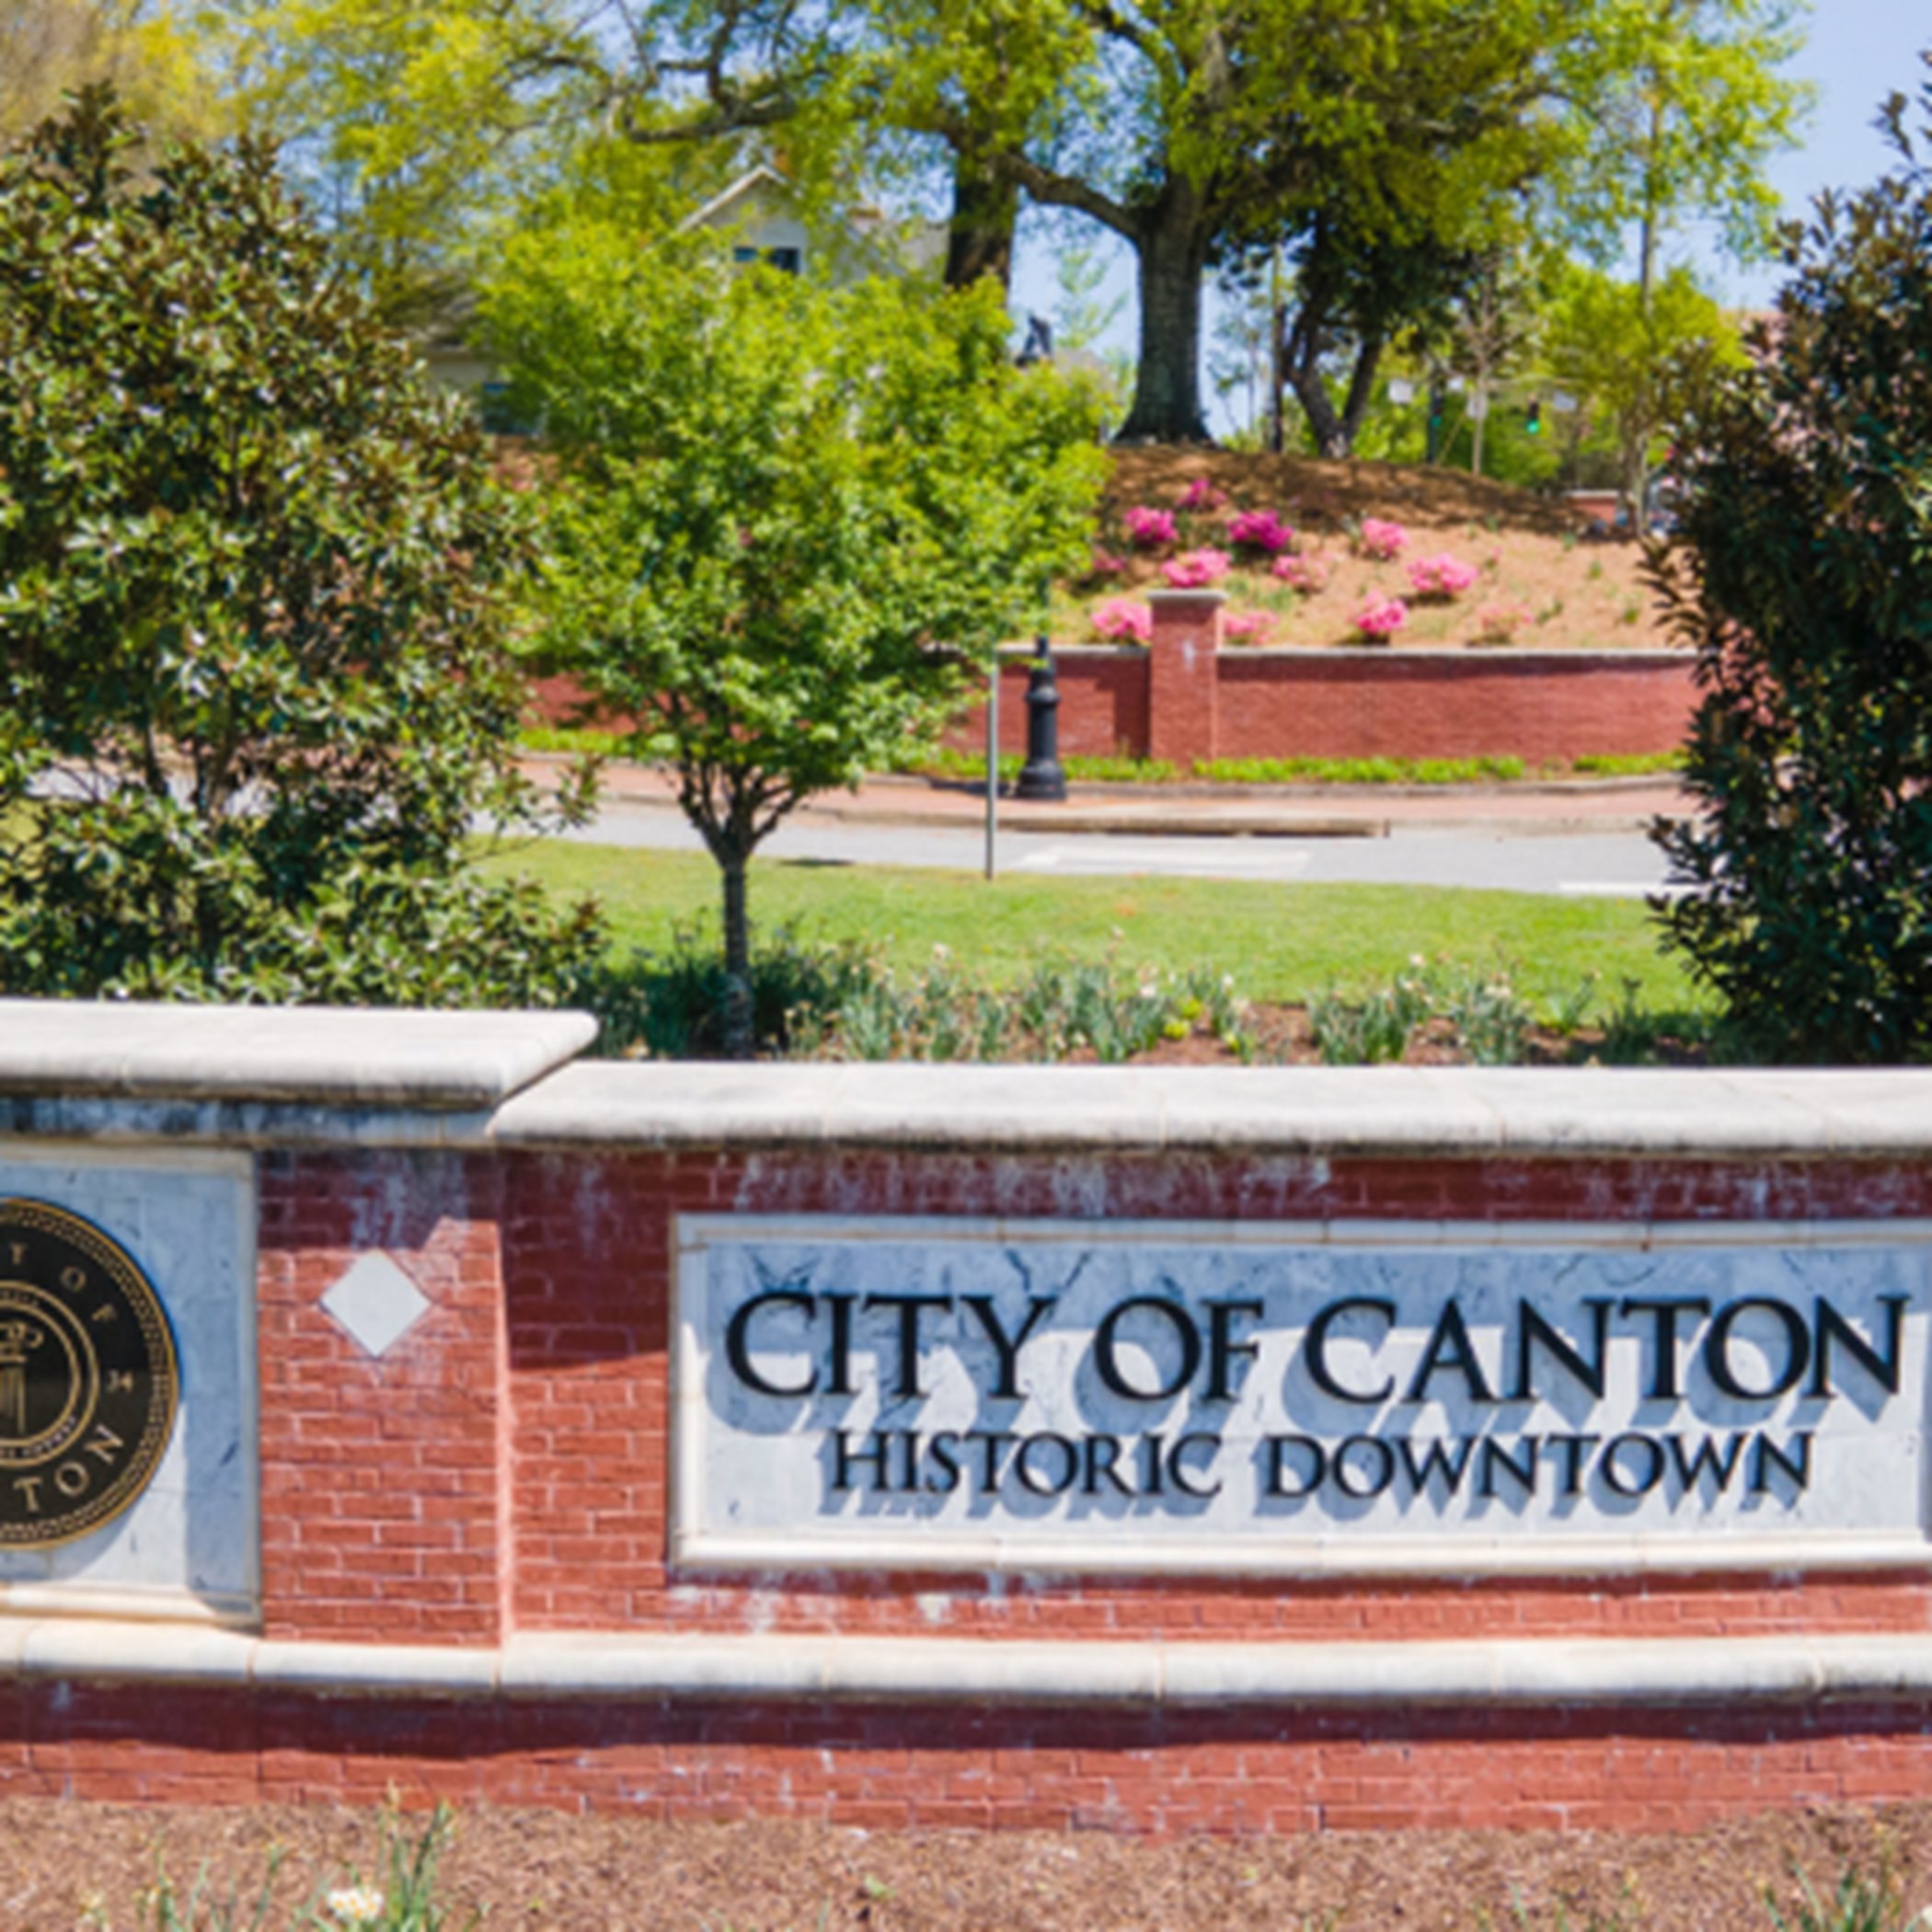 Signage for Historic Downtown Canton